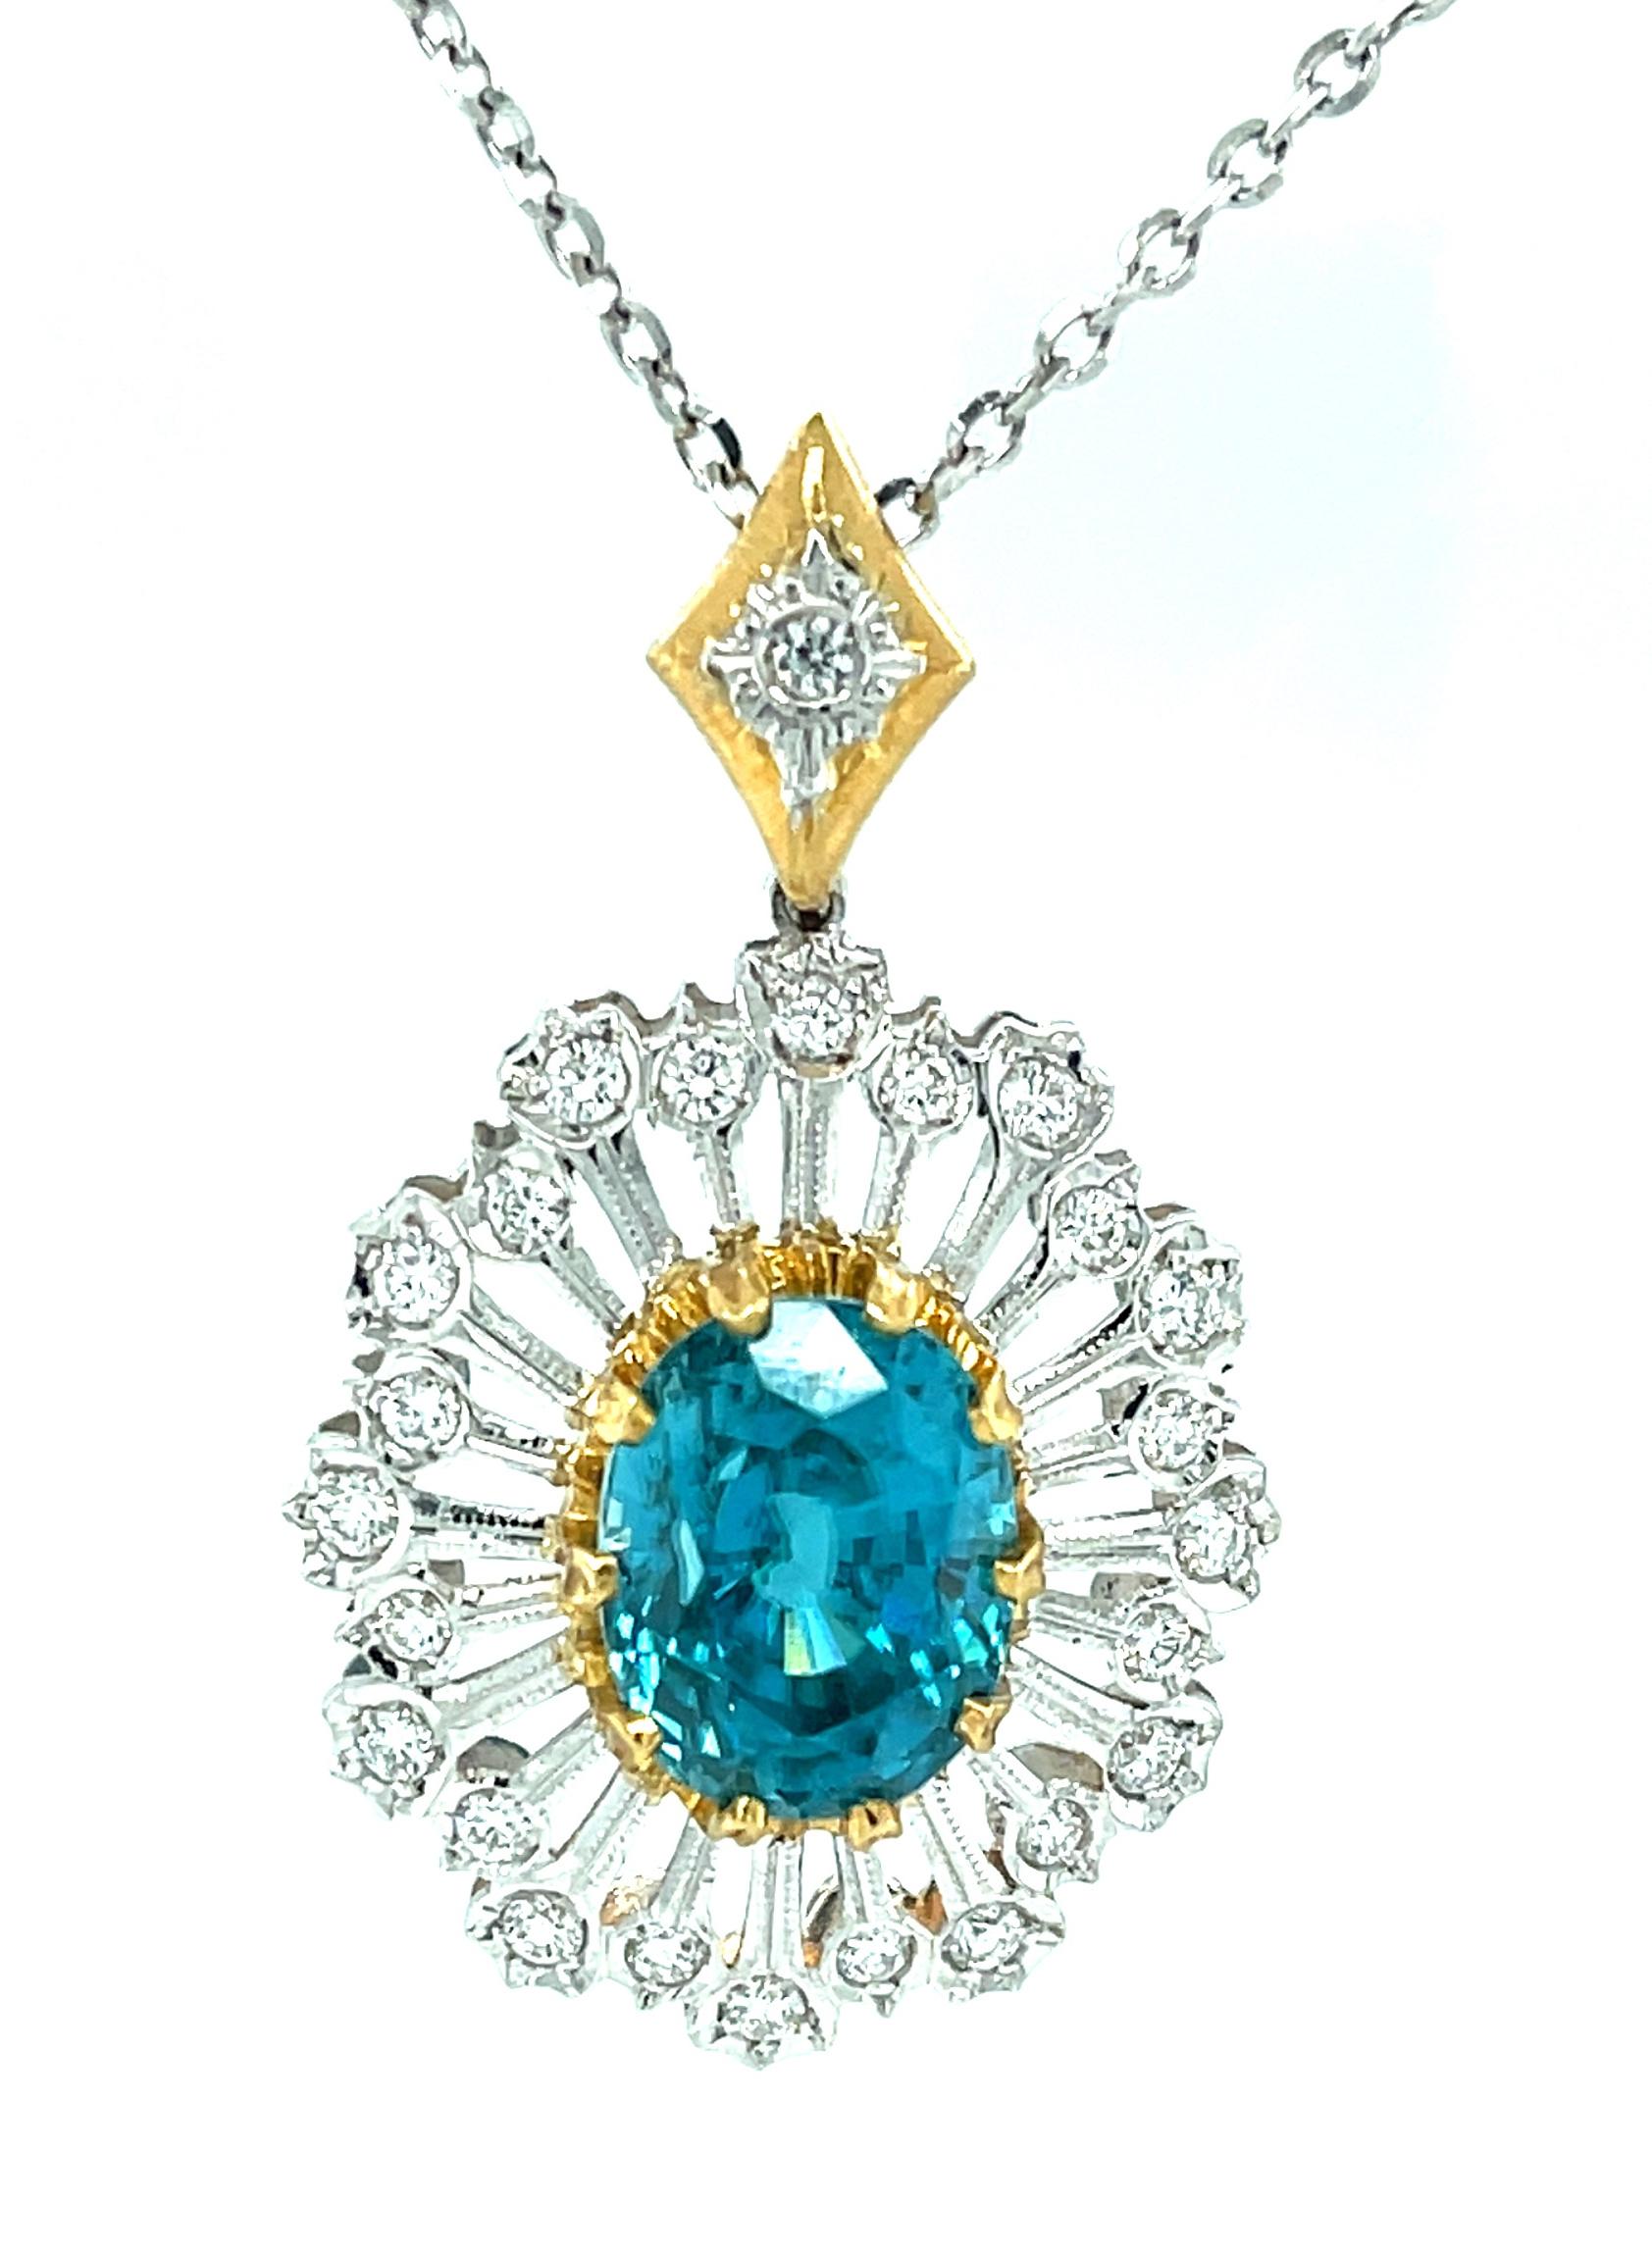 Made in Italy in a Florentine style, this handcrafted blue zircon and diamond pendant is truly stunning! Blue zircon has been popular since the late Victorian era due to its gorgeous blue hue, brilliance, and fire. This extraordinary 13.12 carat gem